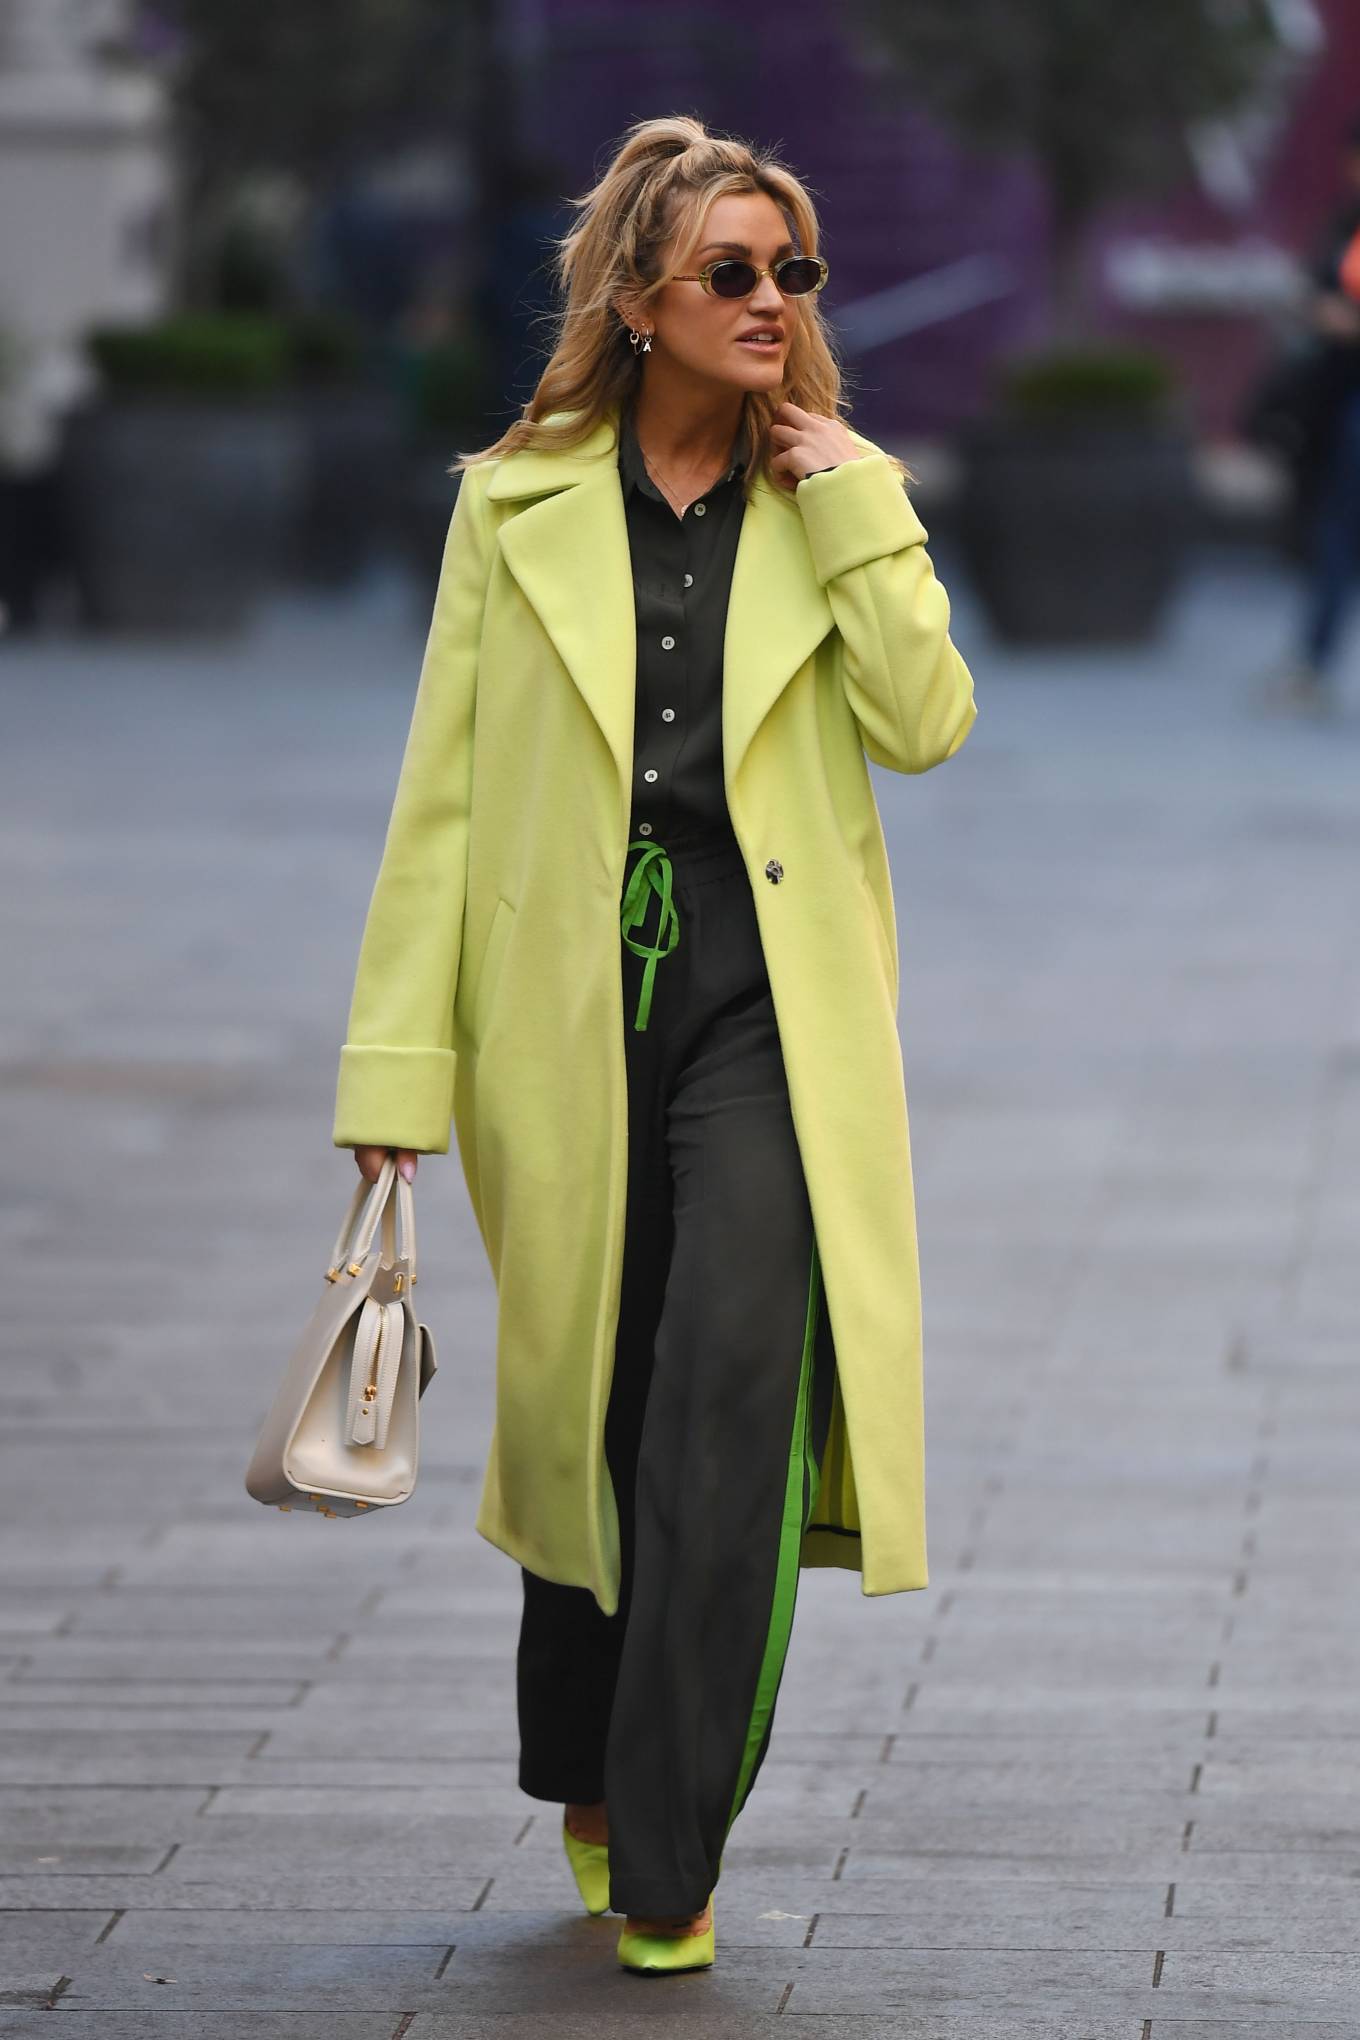 Ashley Roberts 2021 : Ashley Roberts – In a lime green trench coat at Heart radio in London-28